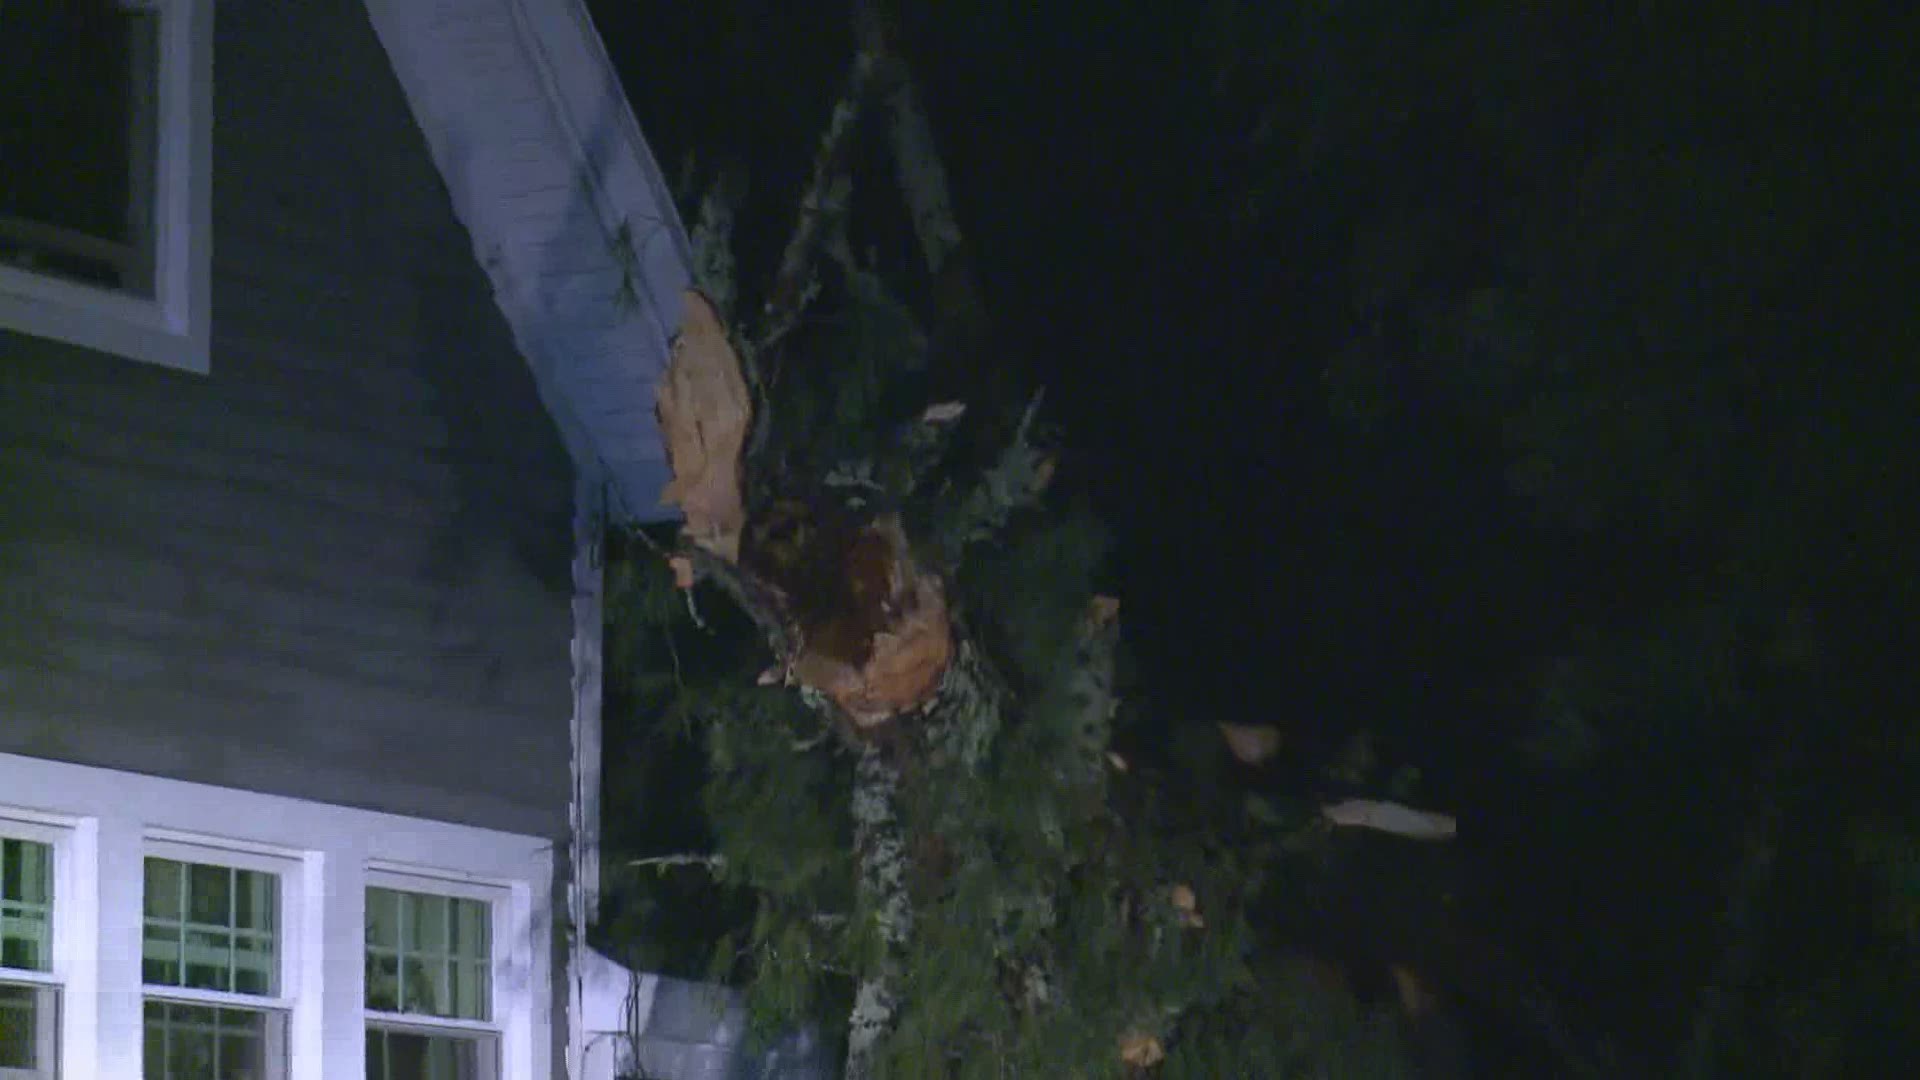 It is unclear at this time if there were any injuries as a result of the tree crashing through the house.